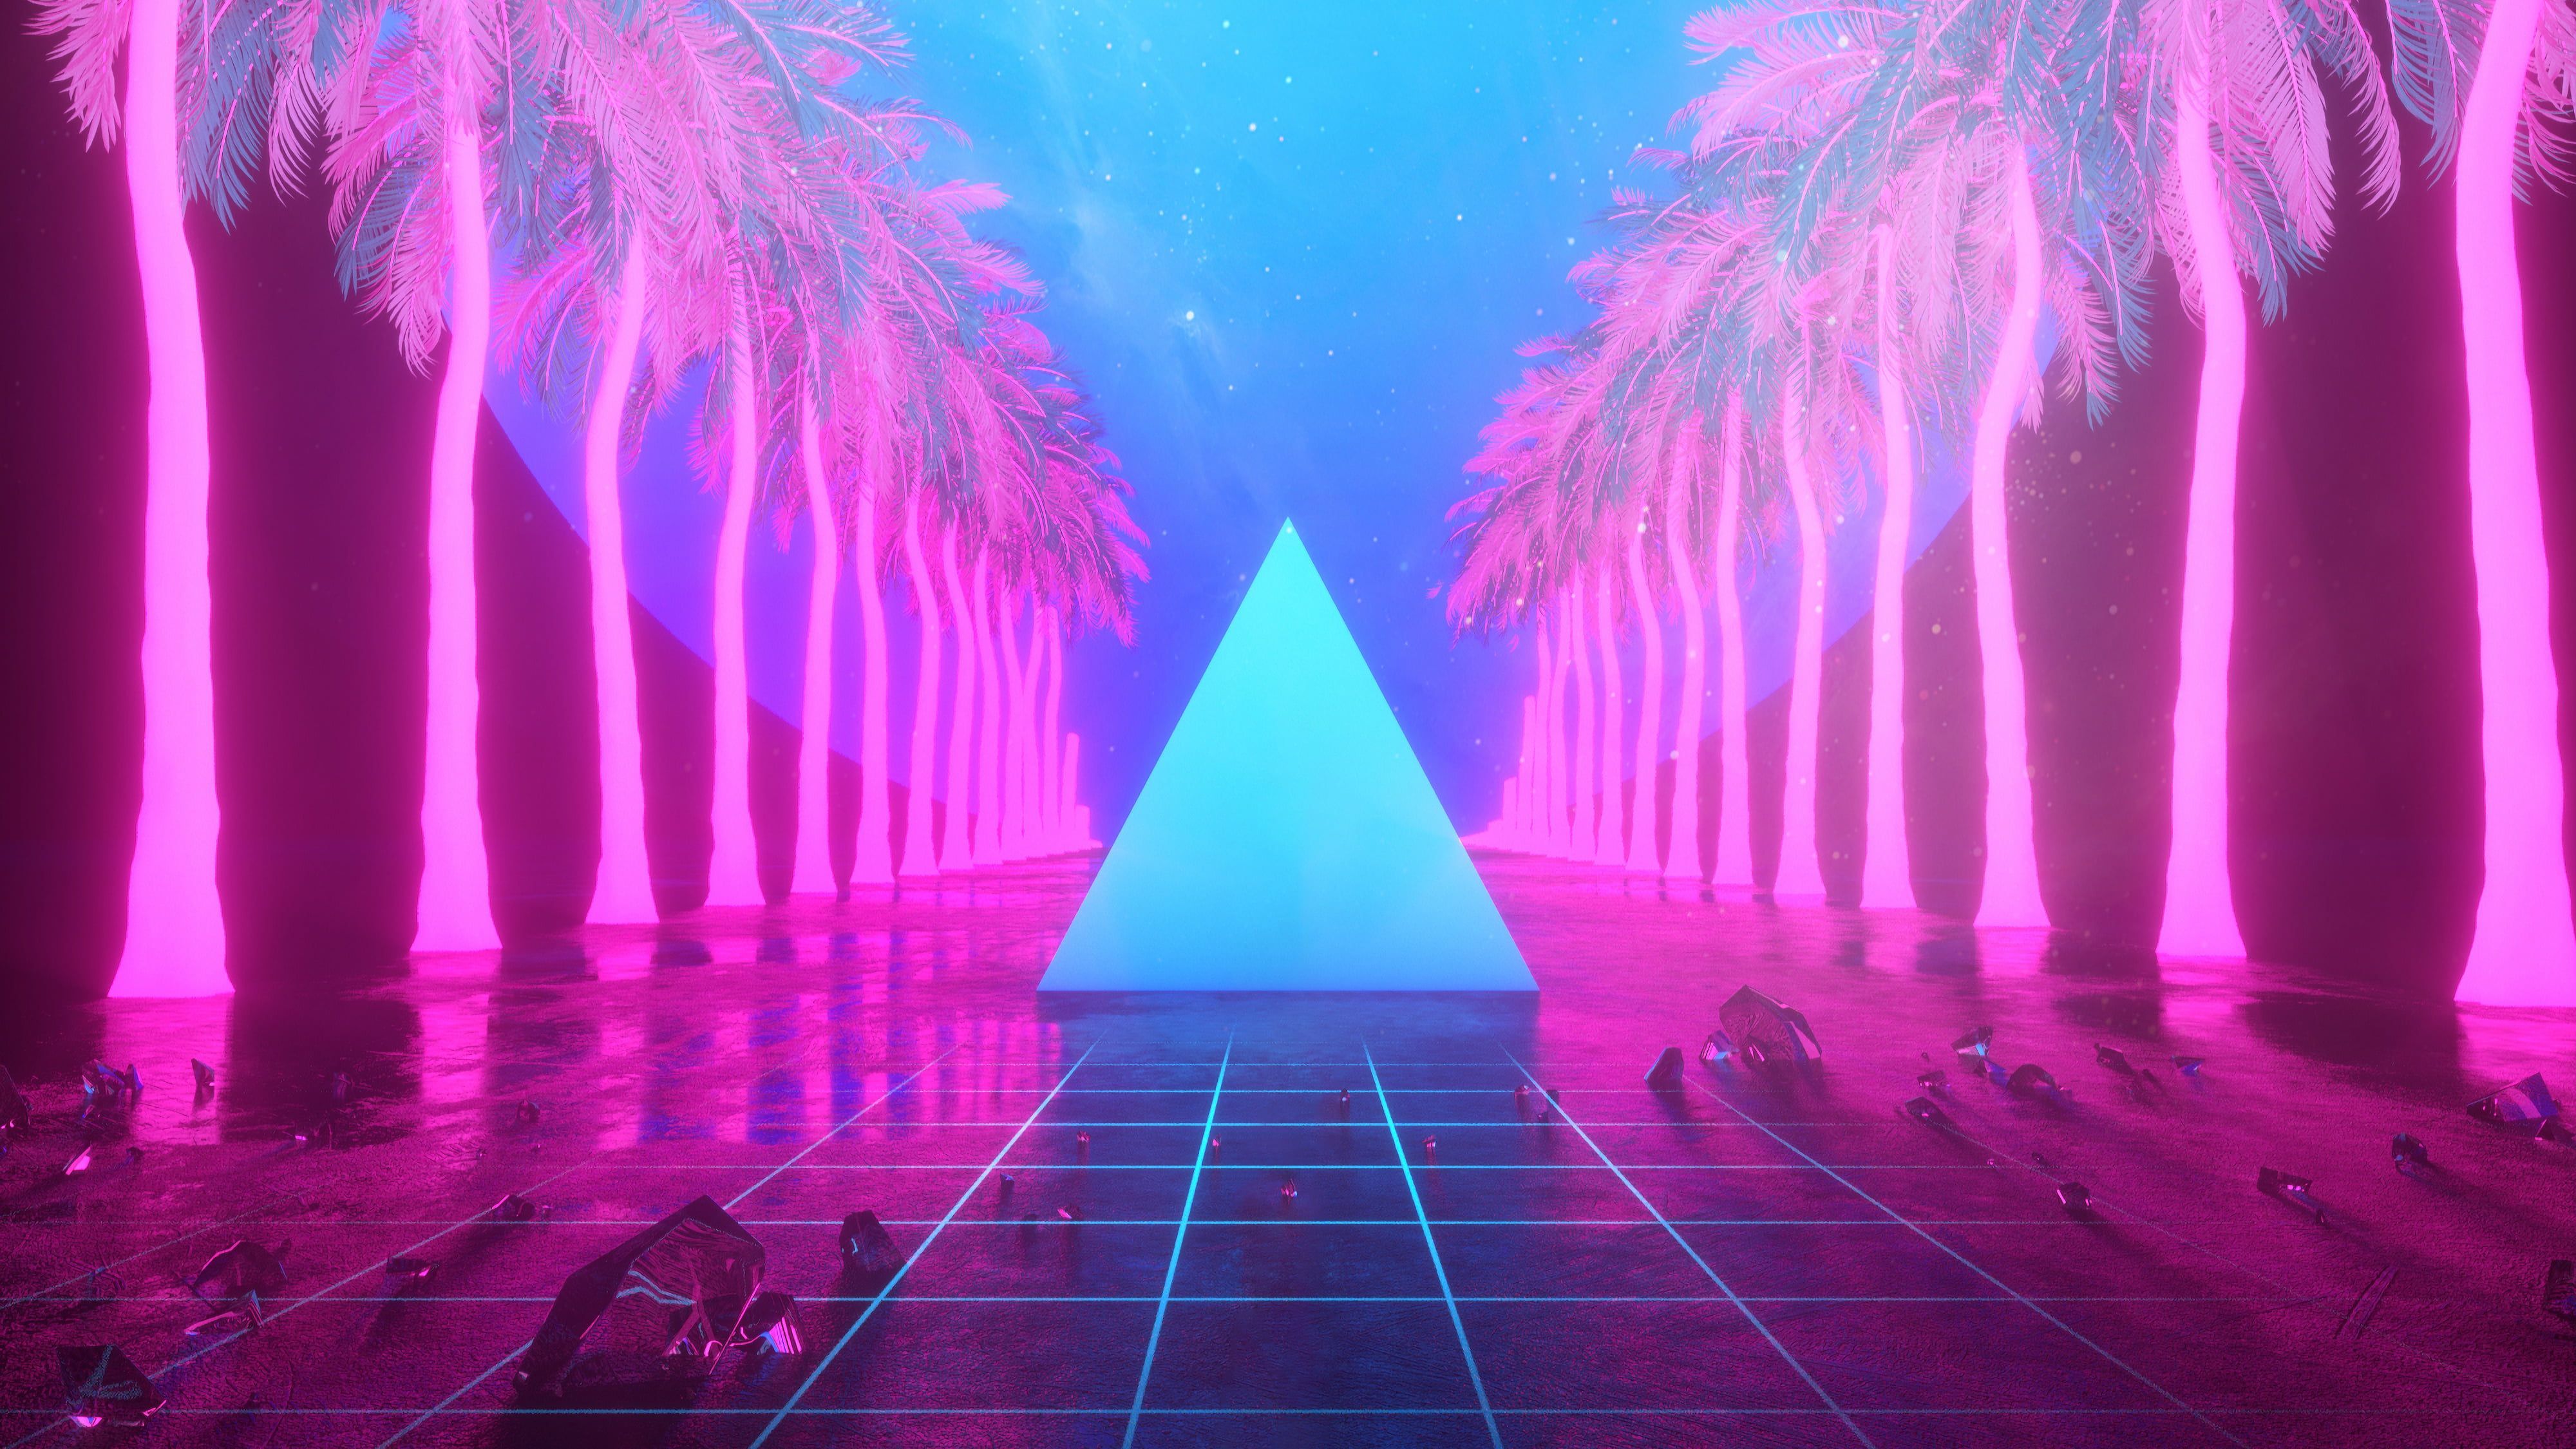 Abstract #pyramid Retro Style #reflection Palm Trees #stars #vaporwave Post Post Modernism #cyan #pink K #w. Palm Trees Wallpaper, Waves Wallpaper, Retro Waves